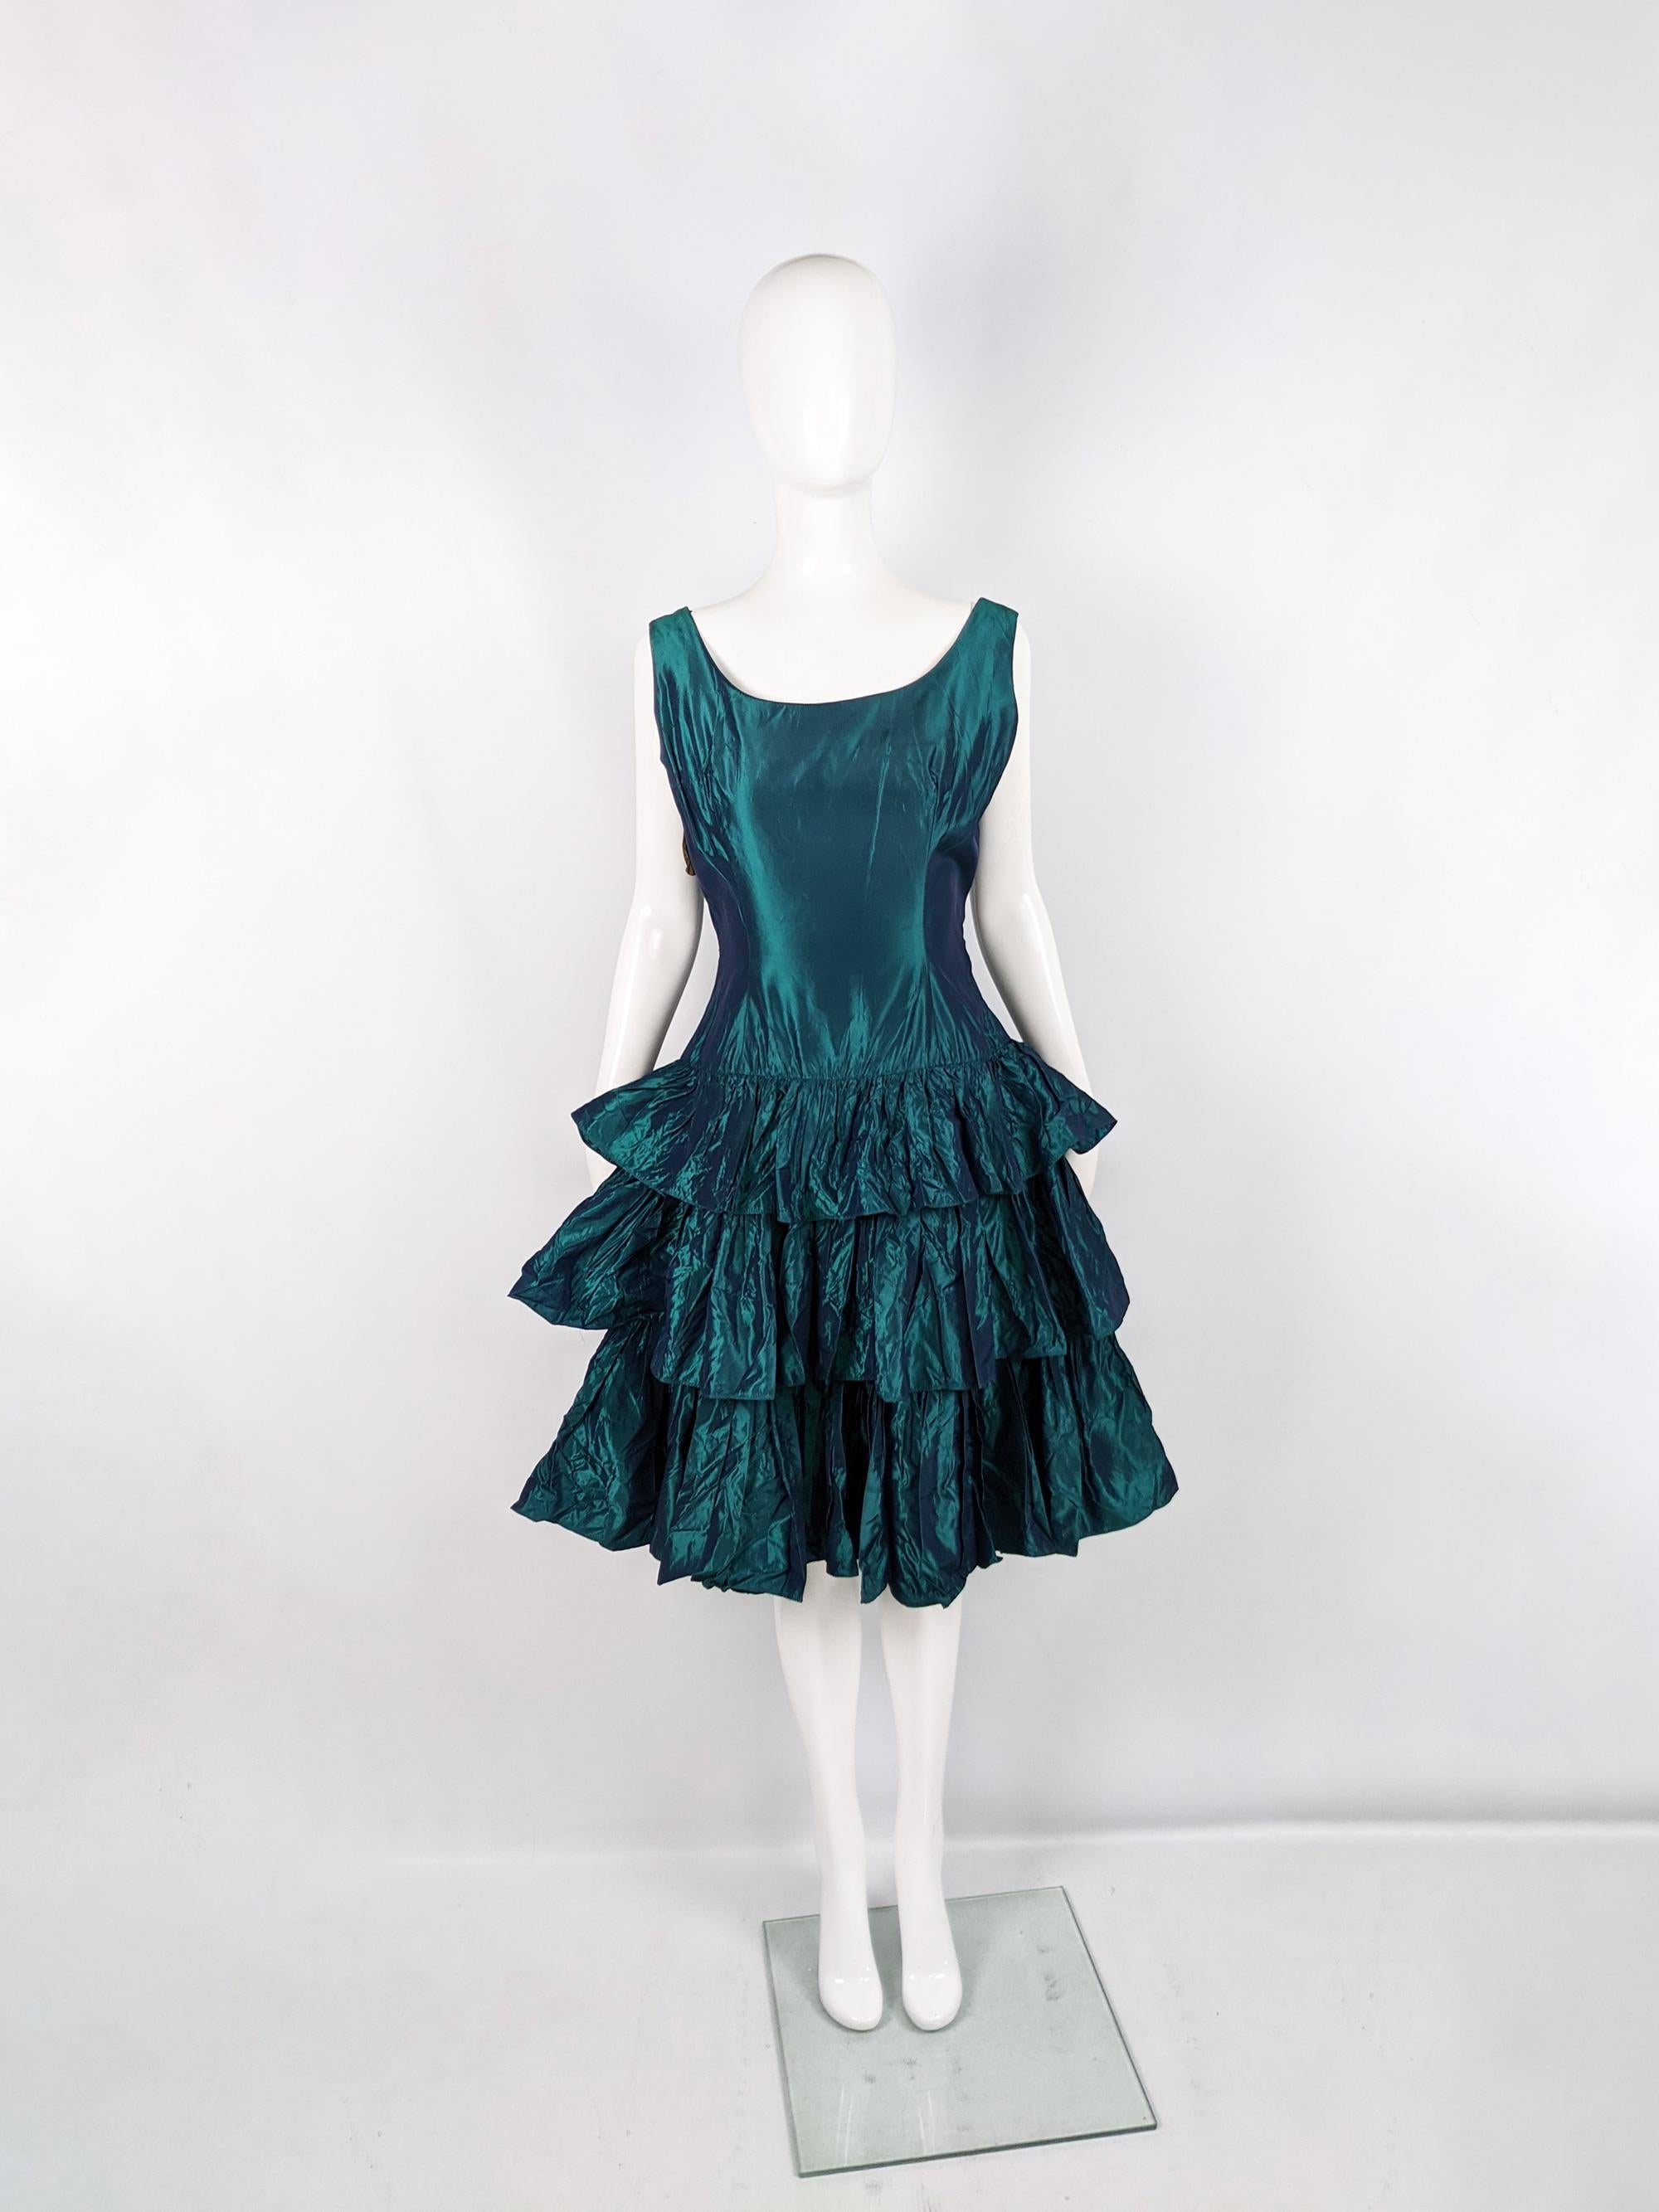 A stunning and rare vintage womens dress from the 1950s by quality British label, Miss London of Mayfair (one of the most expensive districts in the world). In a deep teal green iridescent taffeta fabric with a pleated, tiered skirt and drop waist.